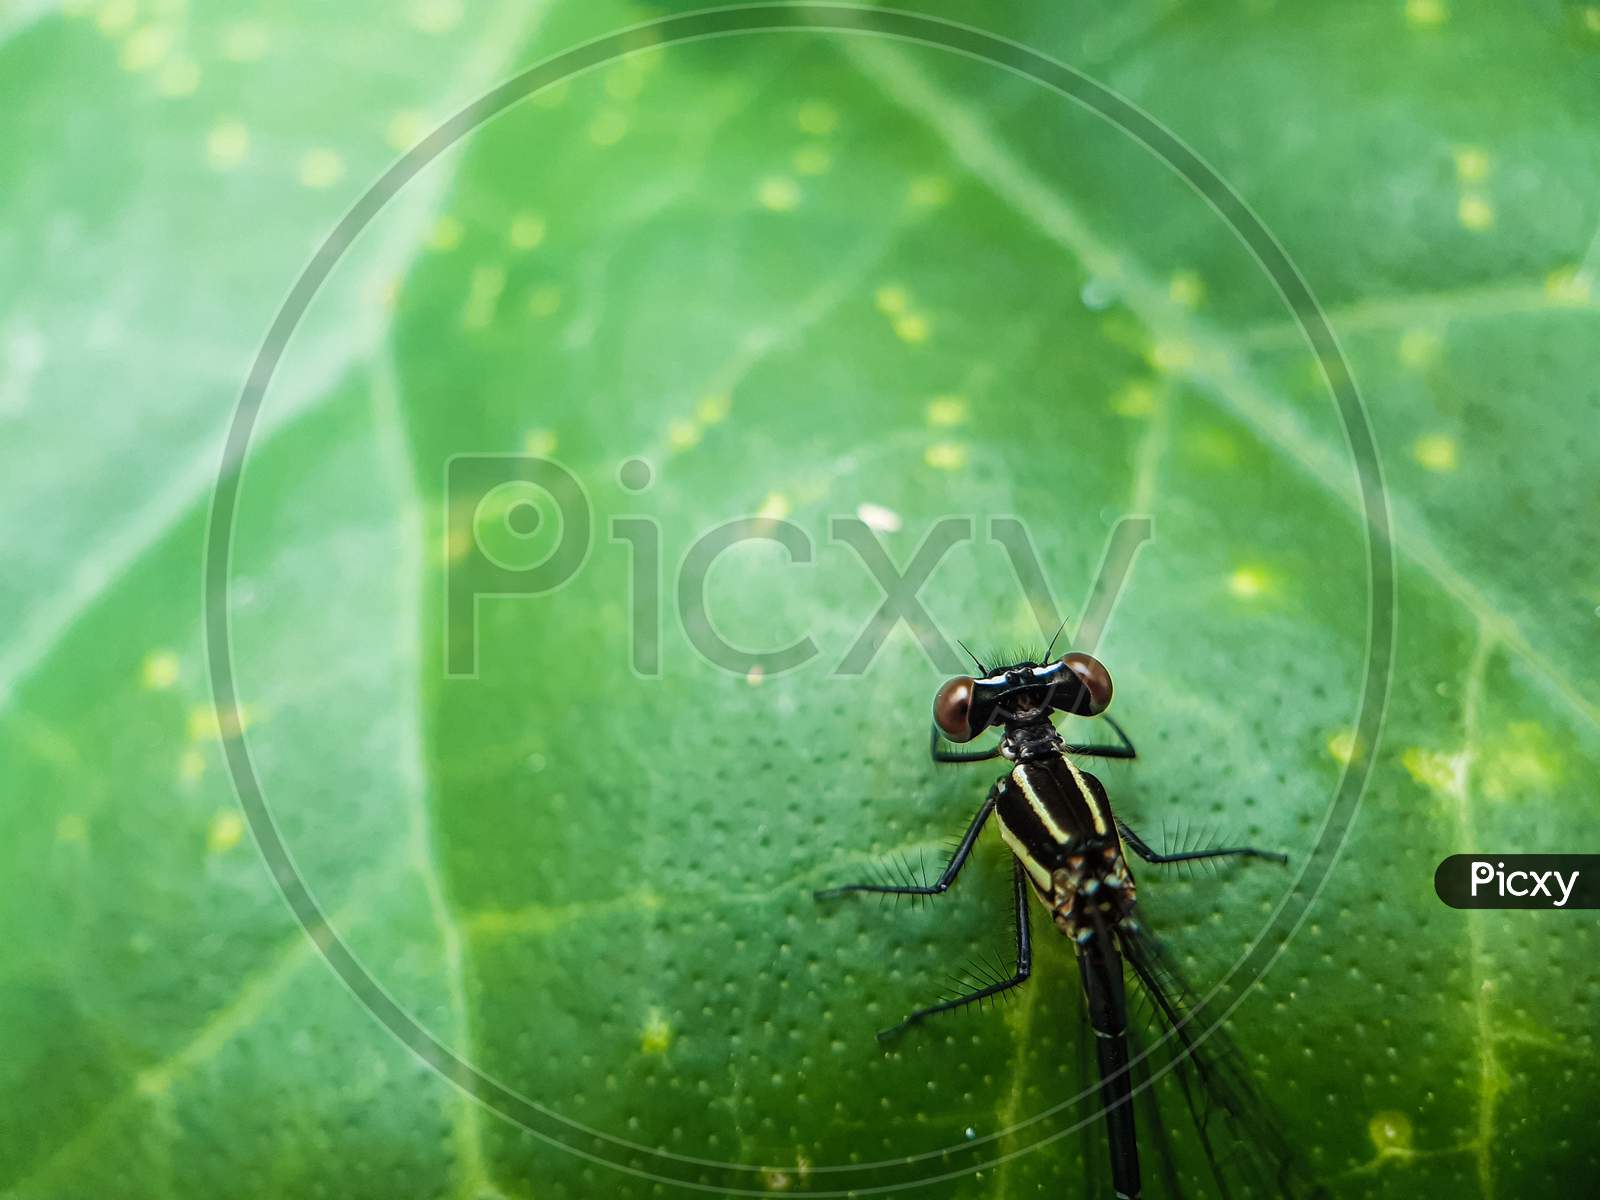 A Beautiful Dragon Fly Is Perched On The Leaves Of A Green Tree. This Is A Garden.